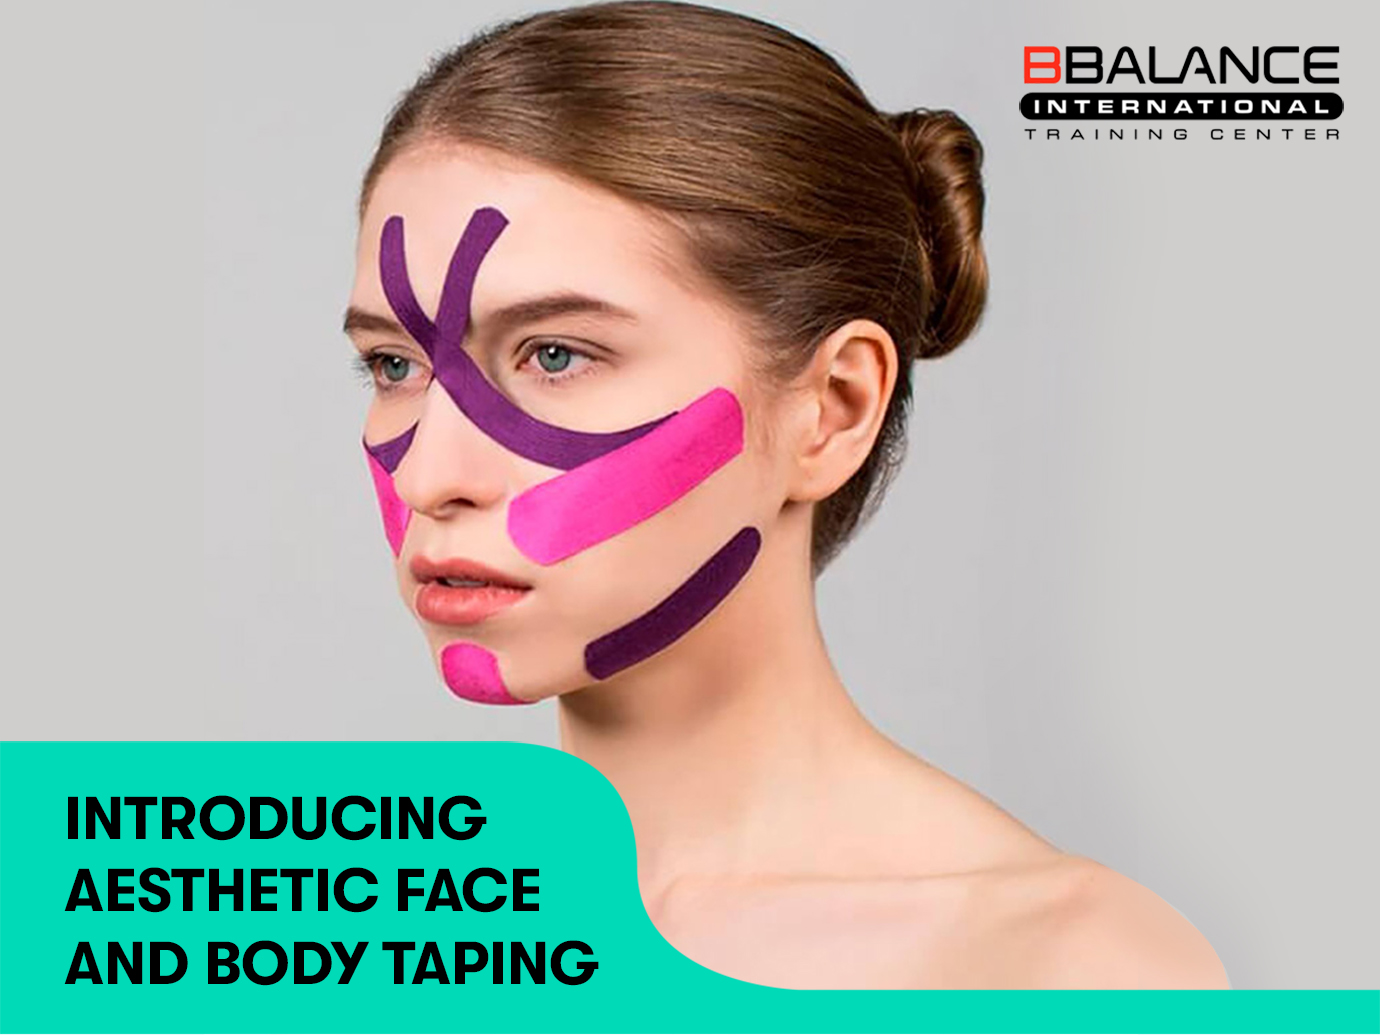 INTRODUCING AESTHETIC FACE AND BODY TAPING